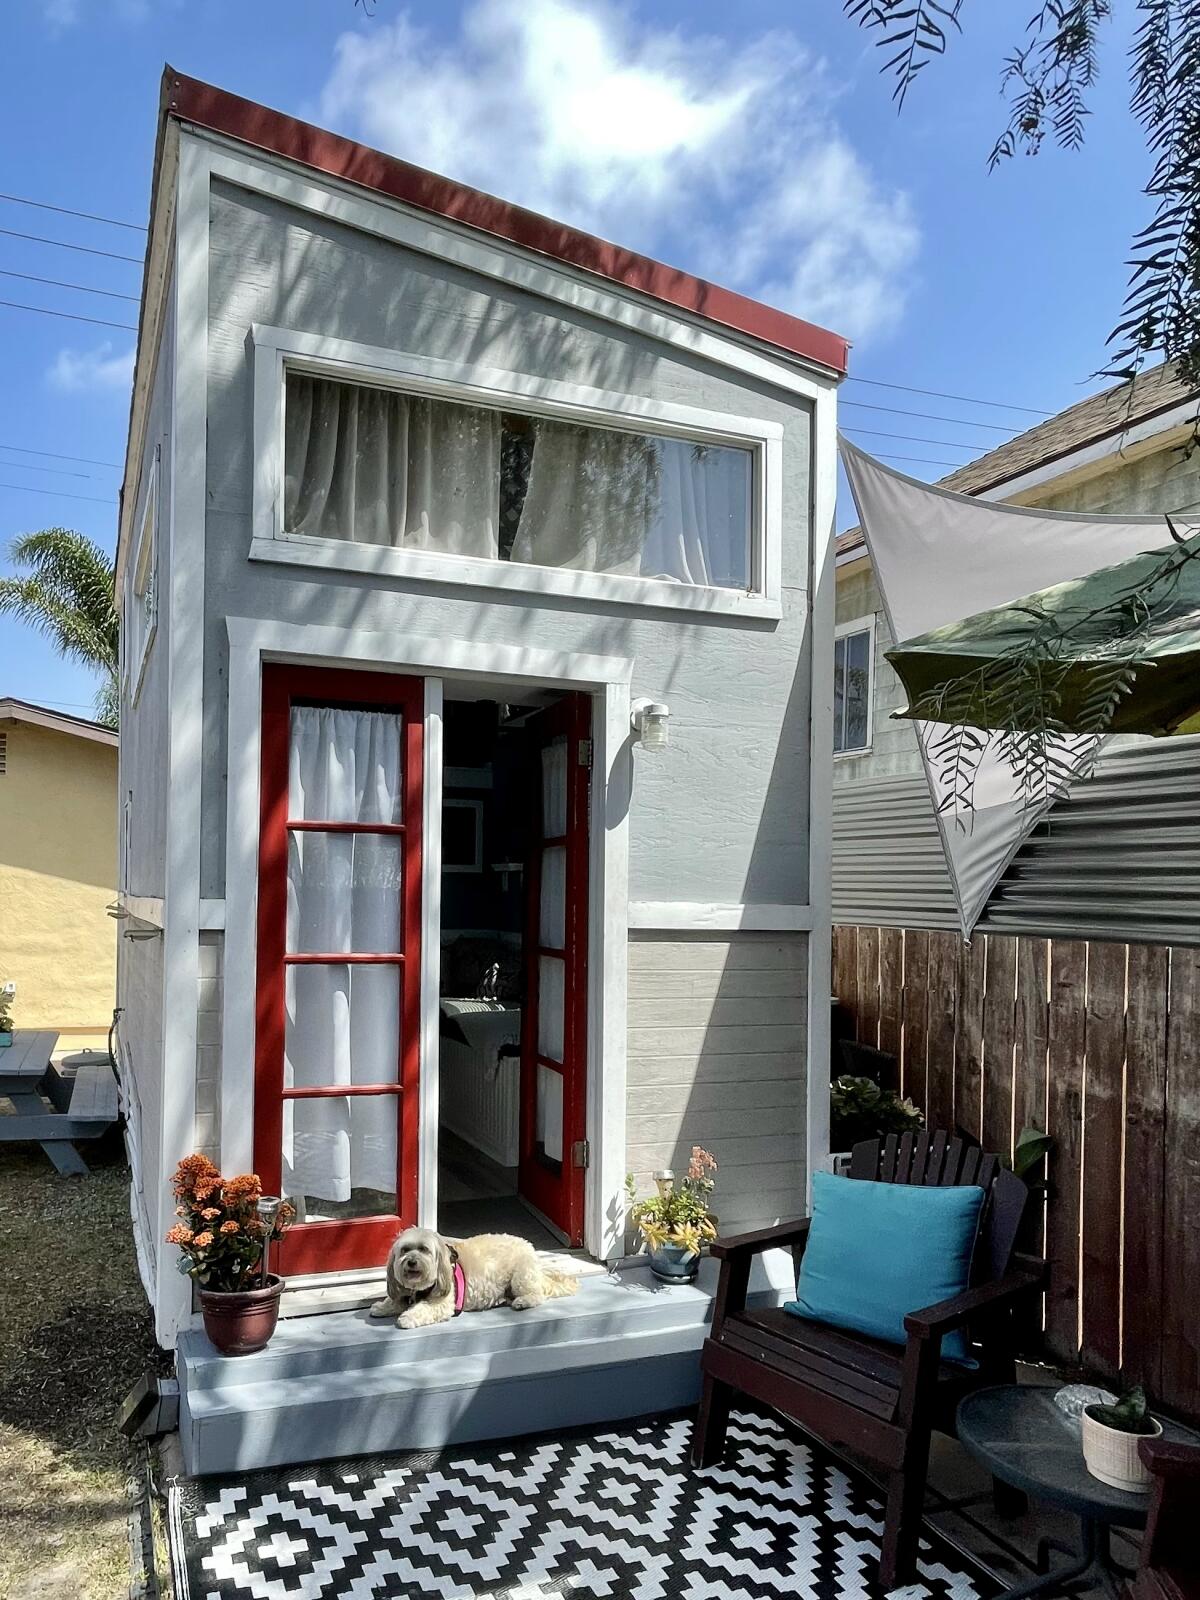 A two-story tiny house with French doors leading to a small patio